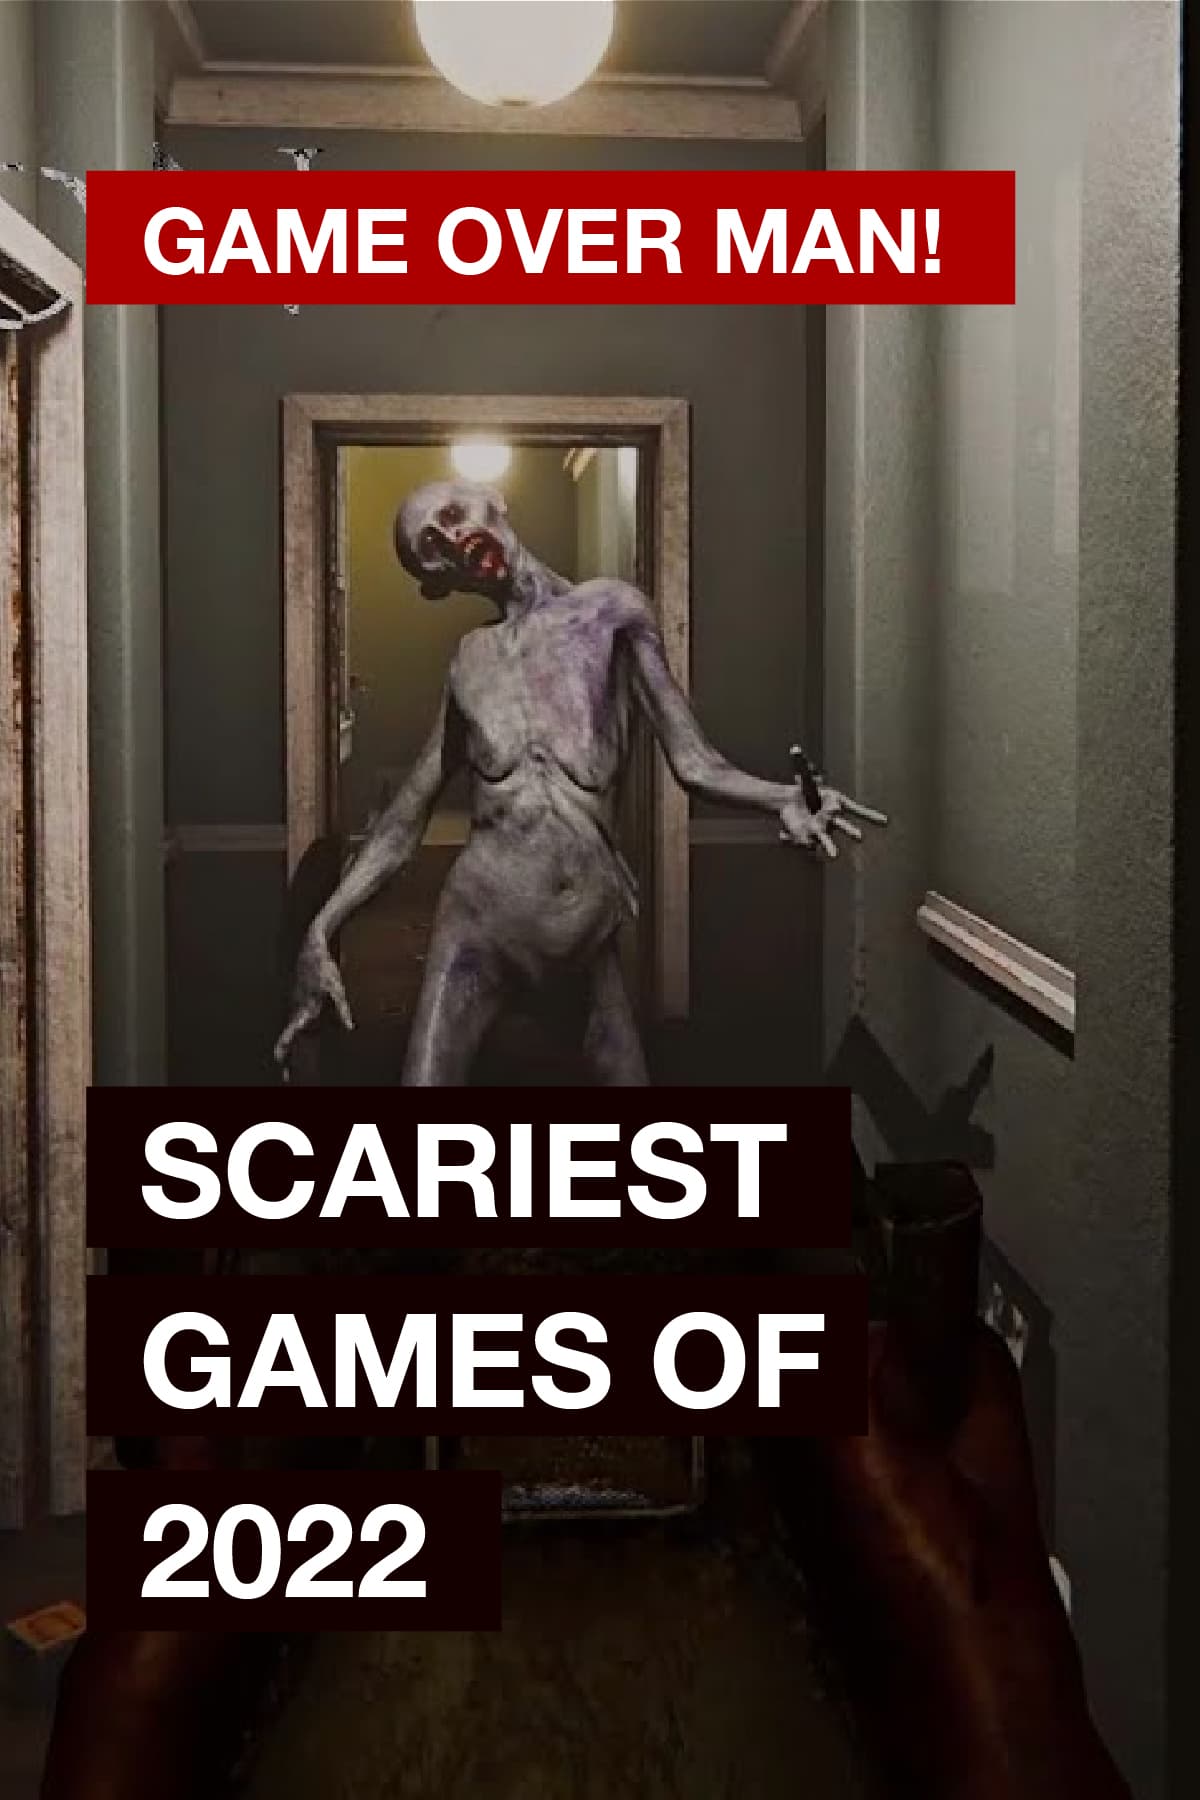 Scariest Games of 2022